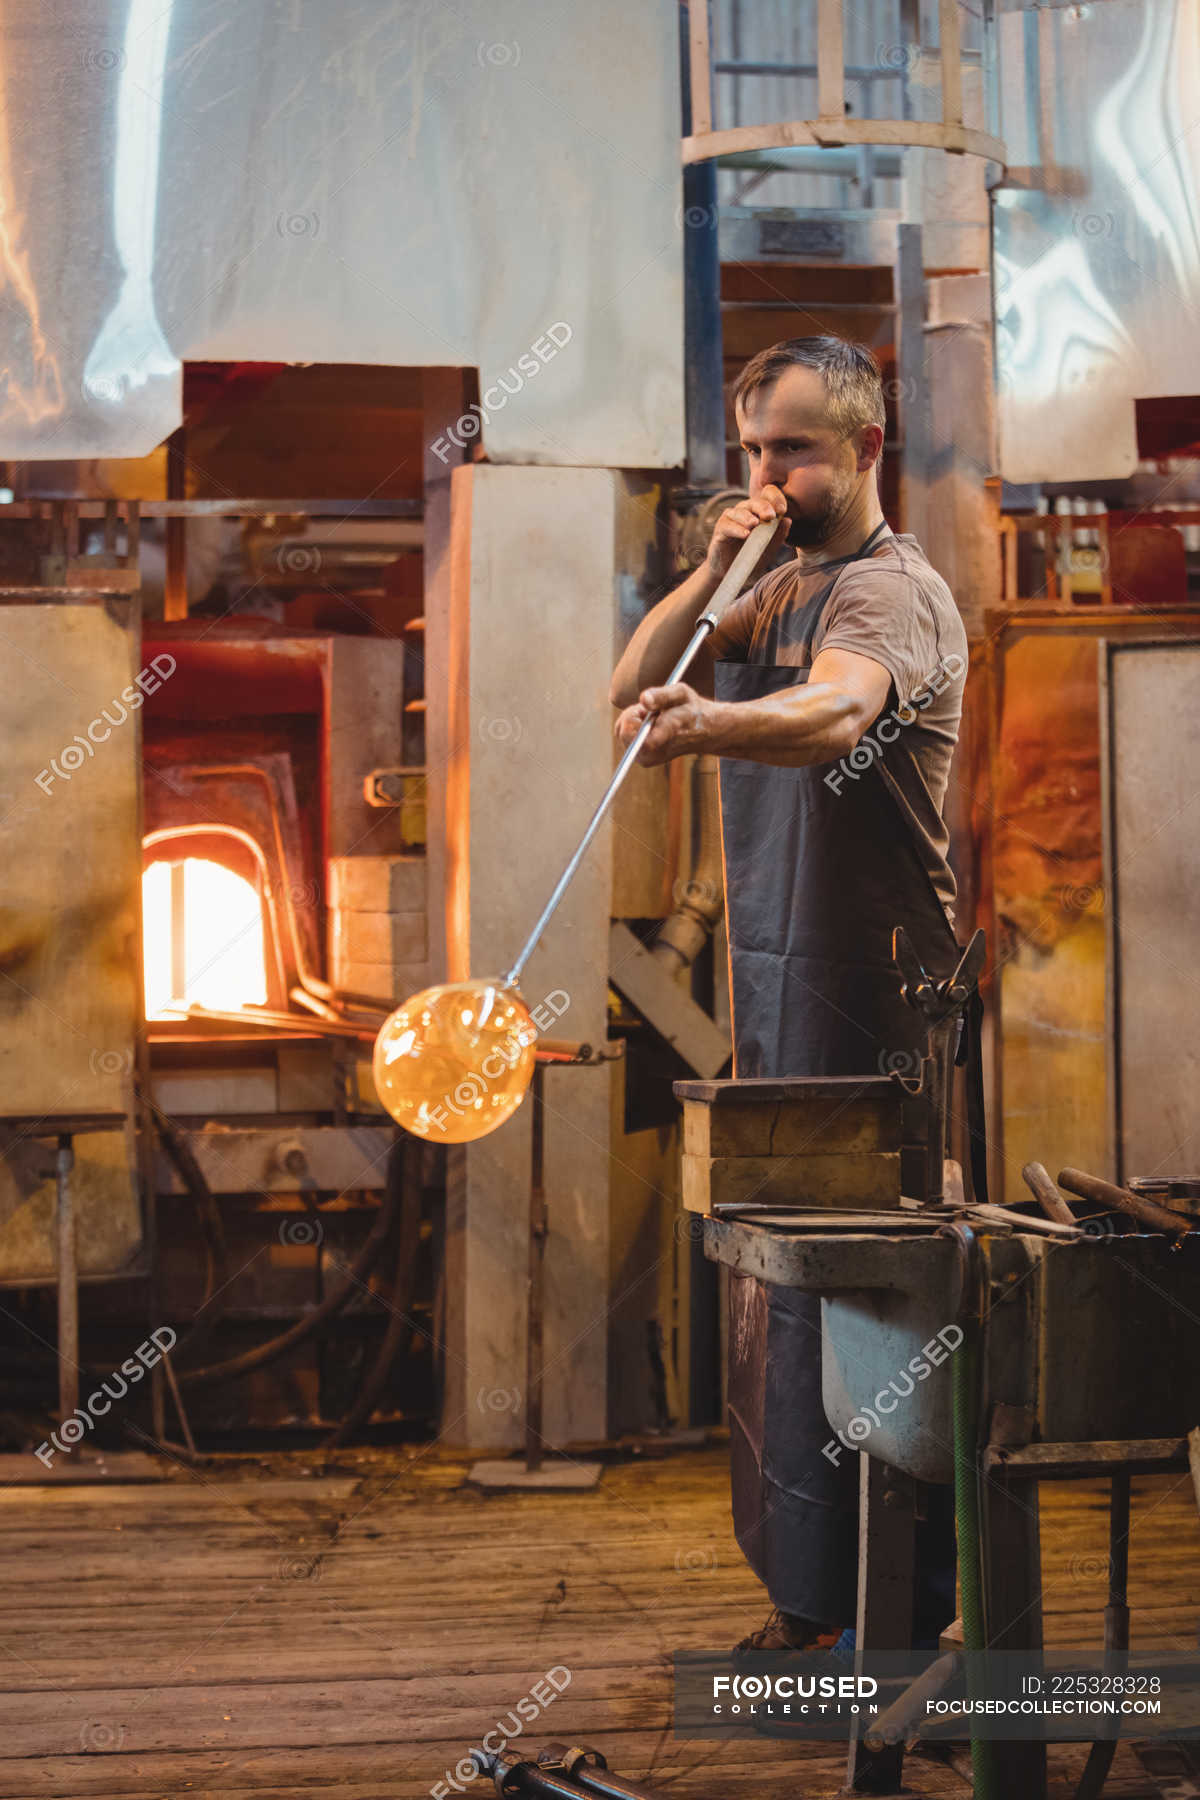 Glassblower Shaping A Glass On The Blowpipe At Glassblowing Factory — Glassmith Making Stock